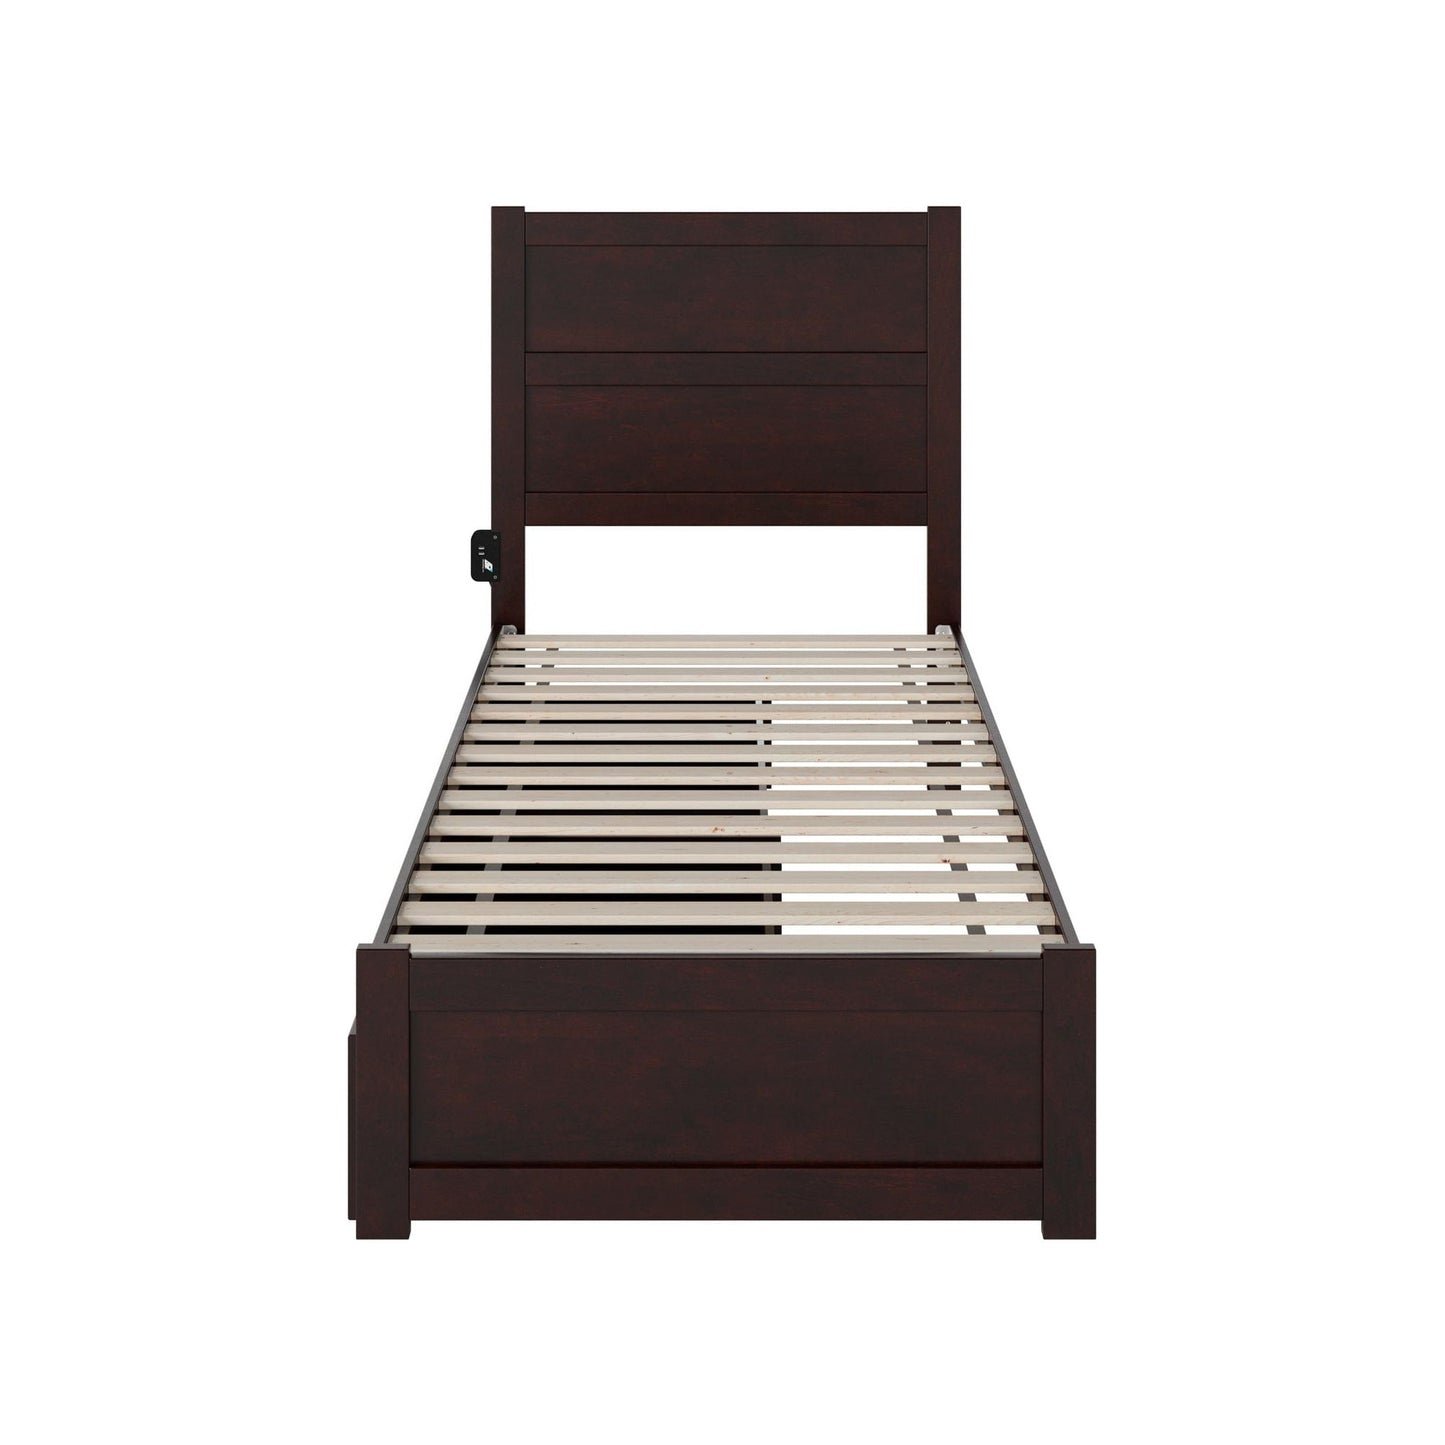 AFI Furnishings NoHo Twin Extra Long Bed with Footboard and 2 Drawers in Espresso